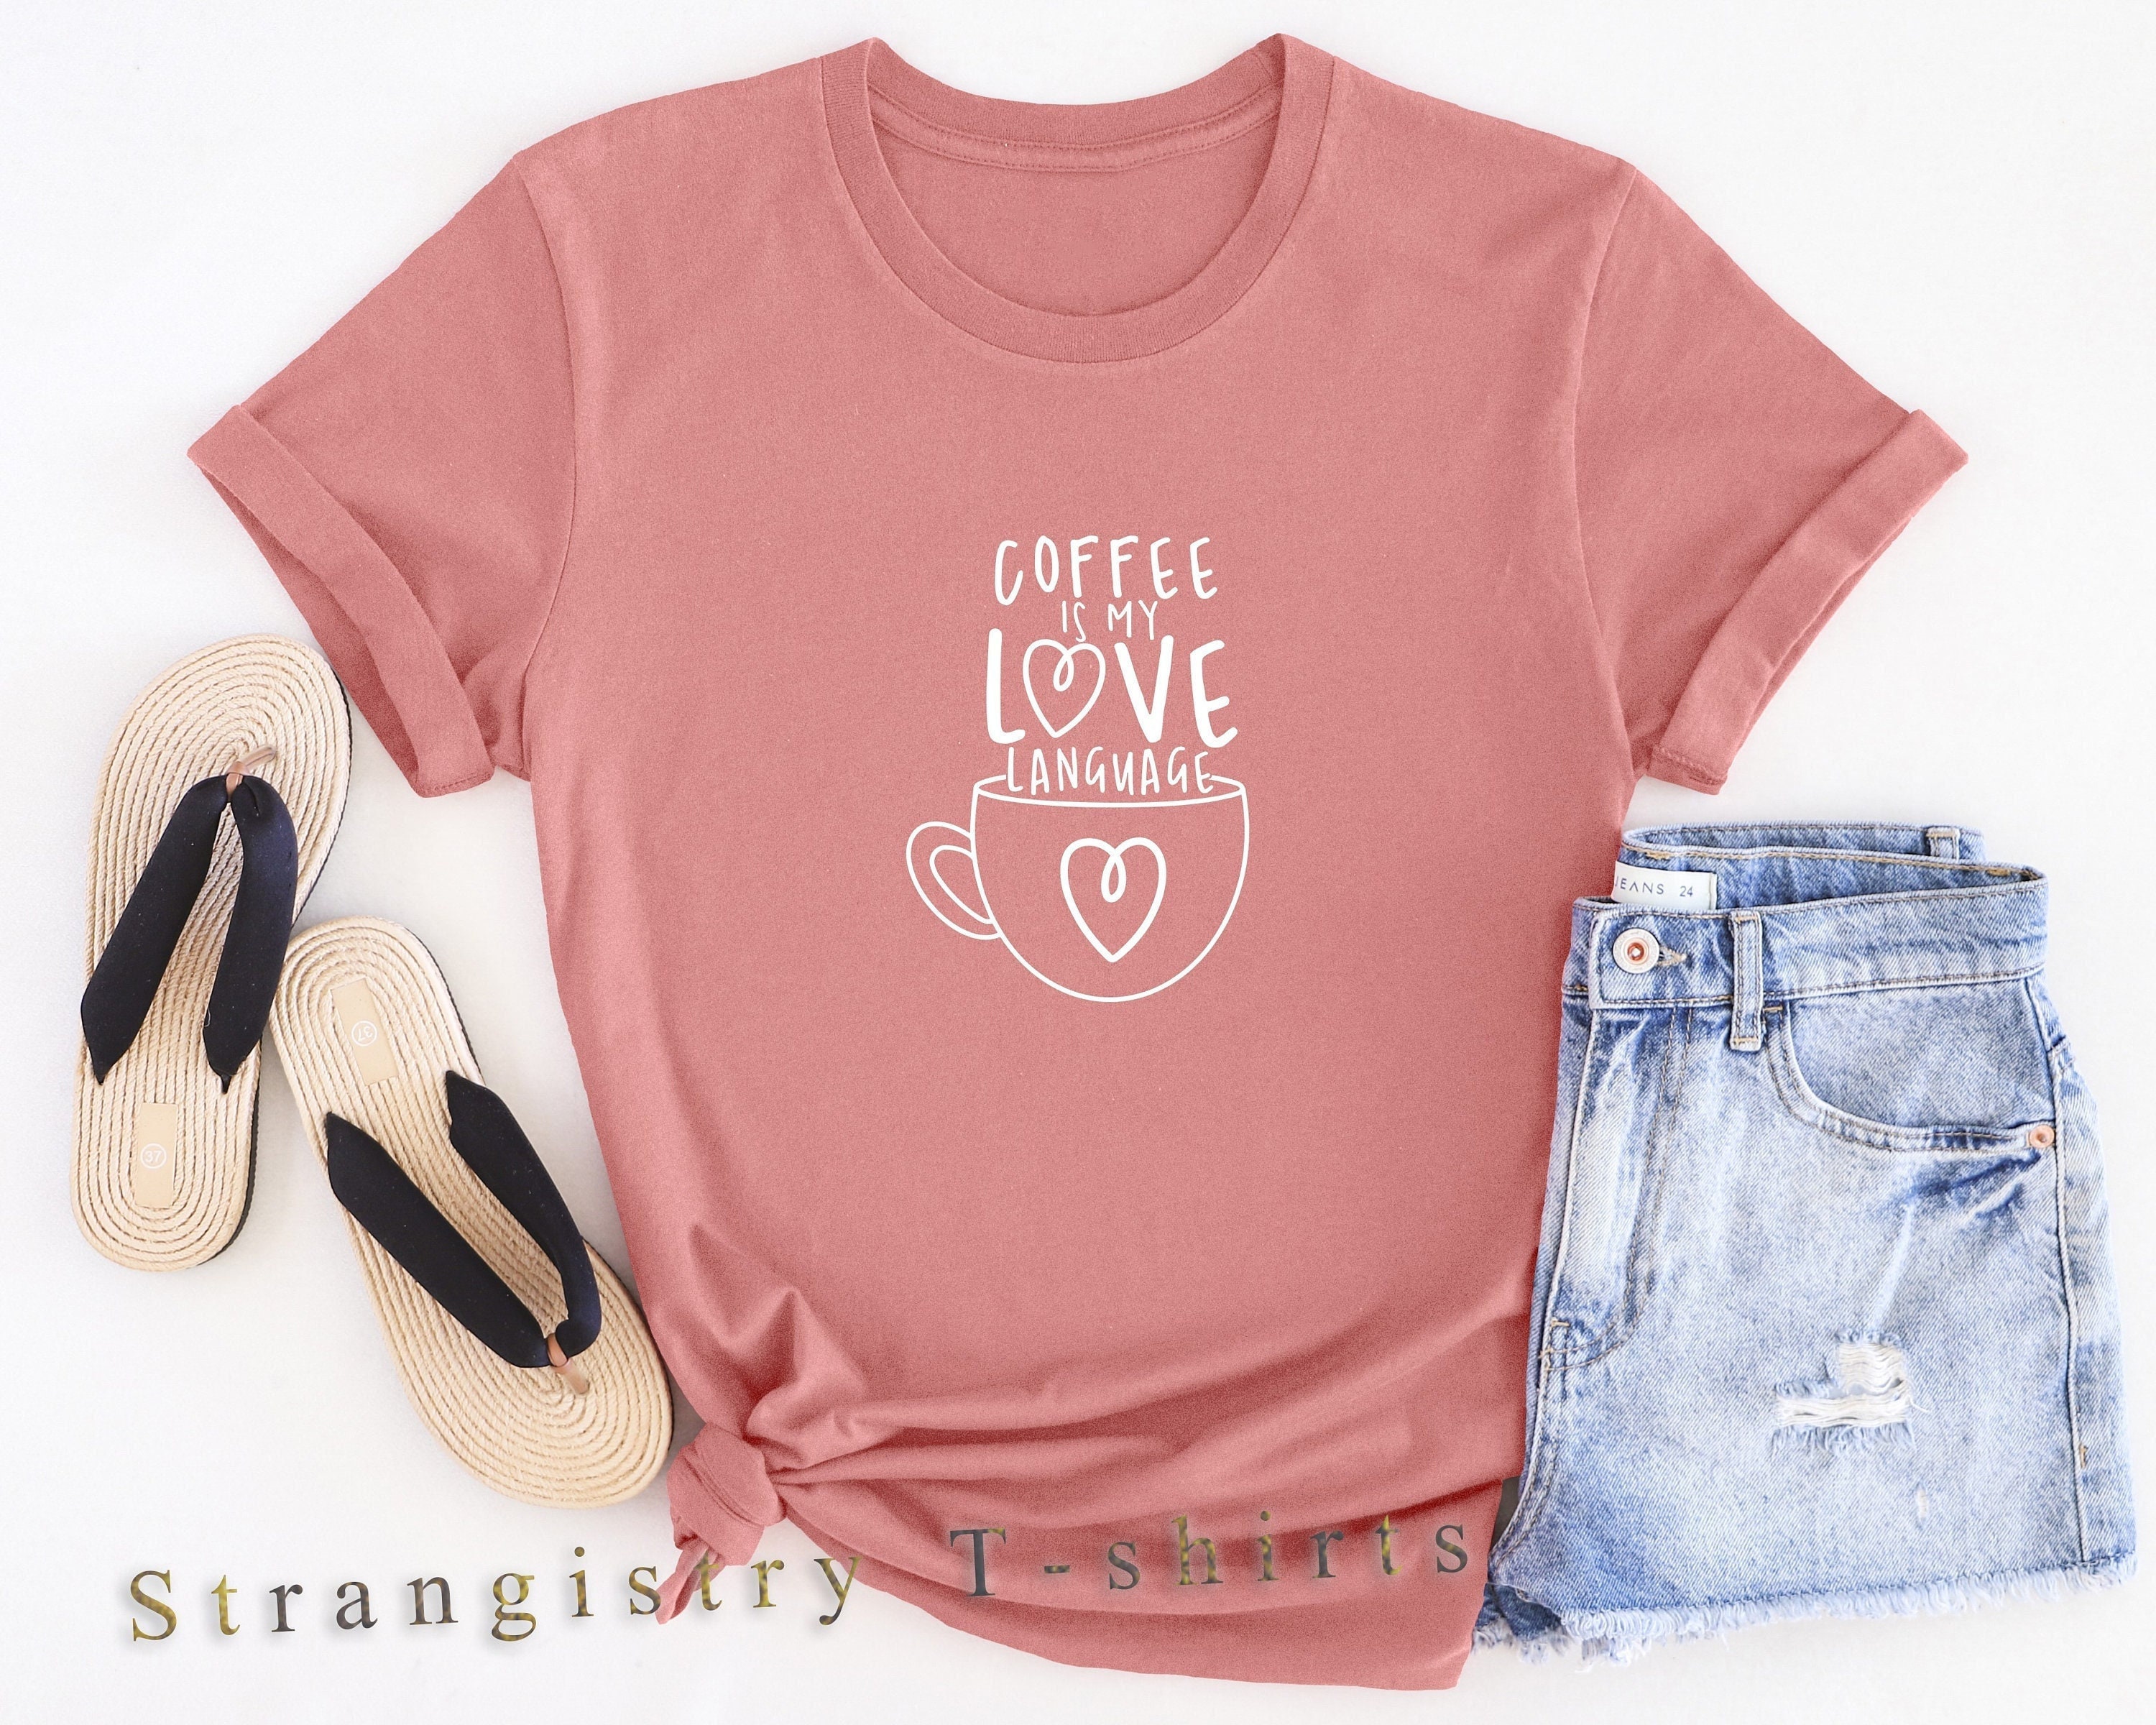 Coffee is My Love Language, Sarcastic Shirts, Funny Shirts, Sassy Women, Retirement Shirts For Women, Mom Shirts, Sassy Shirt, Wife Shirt